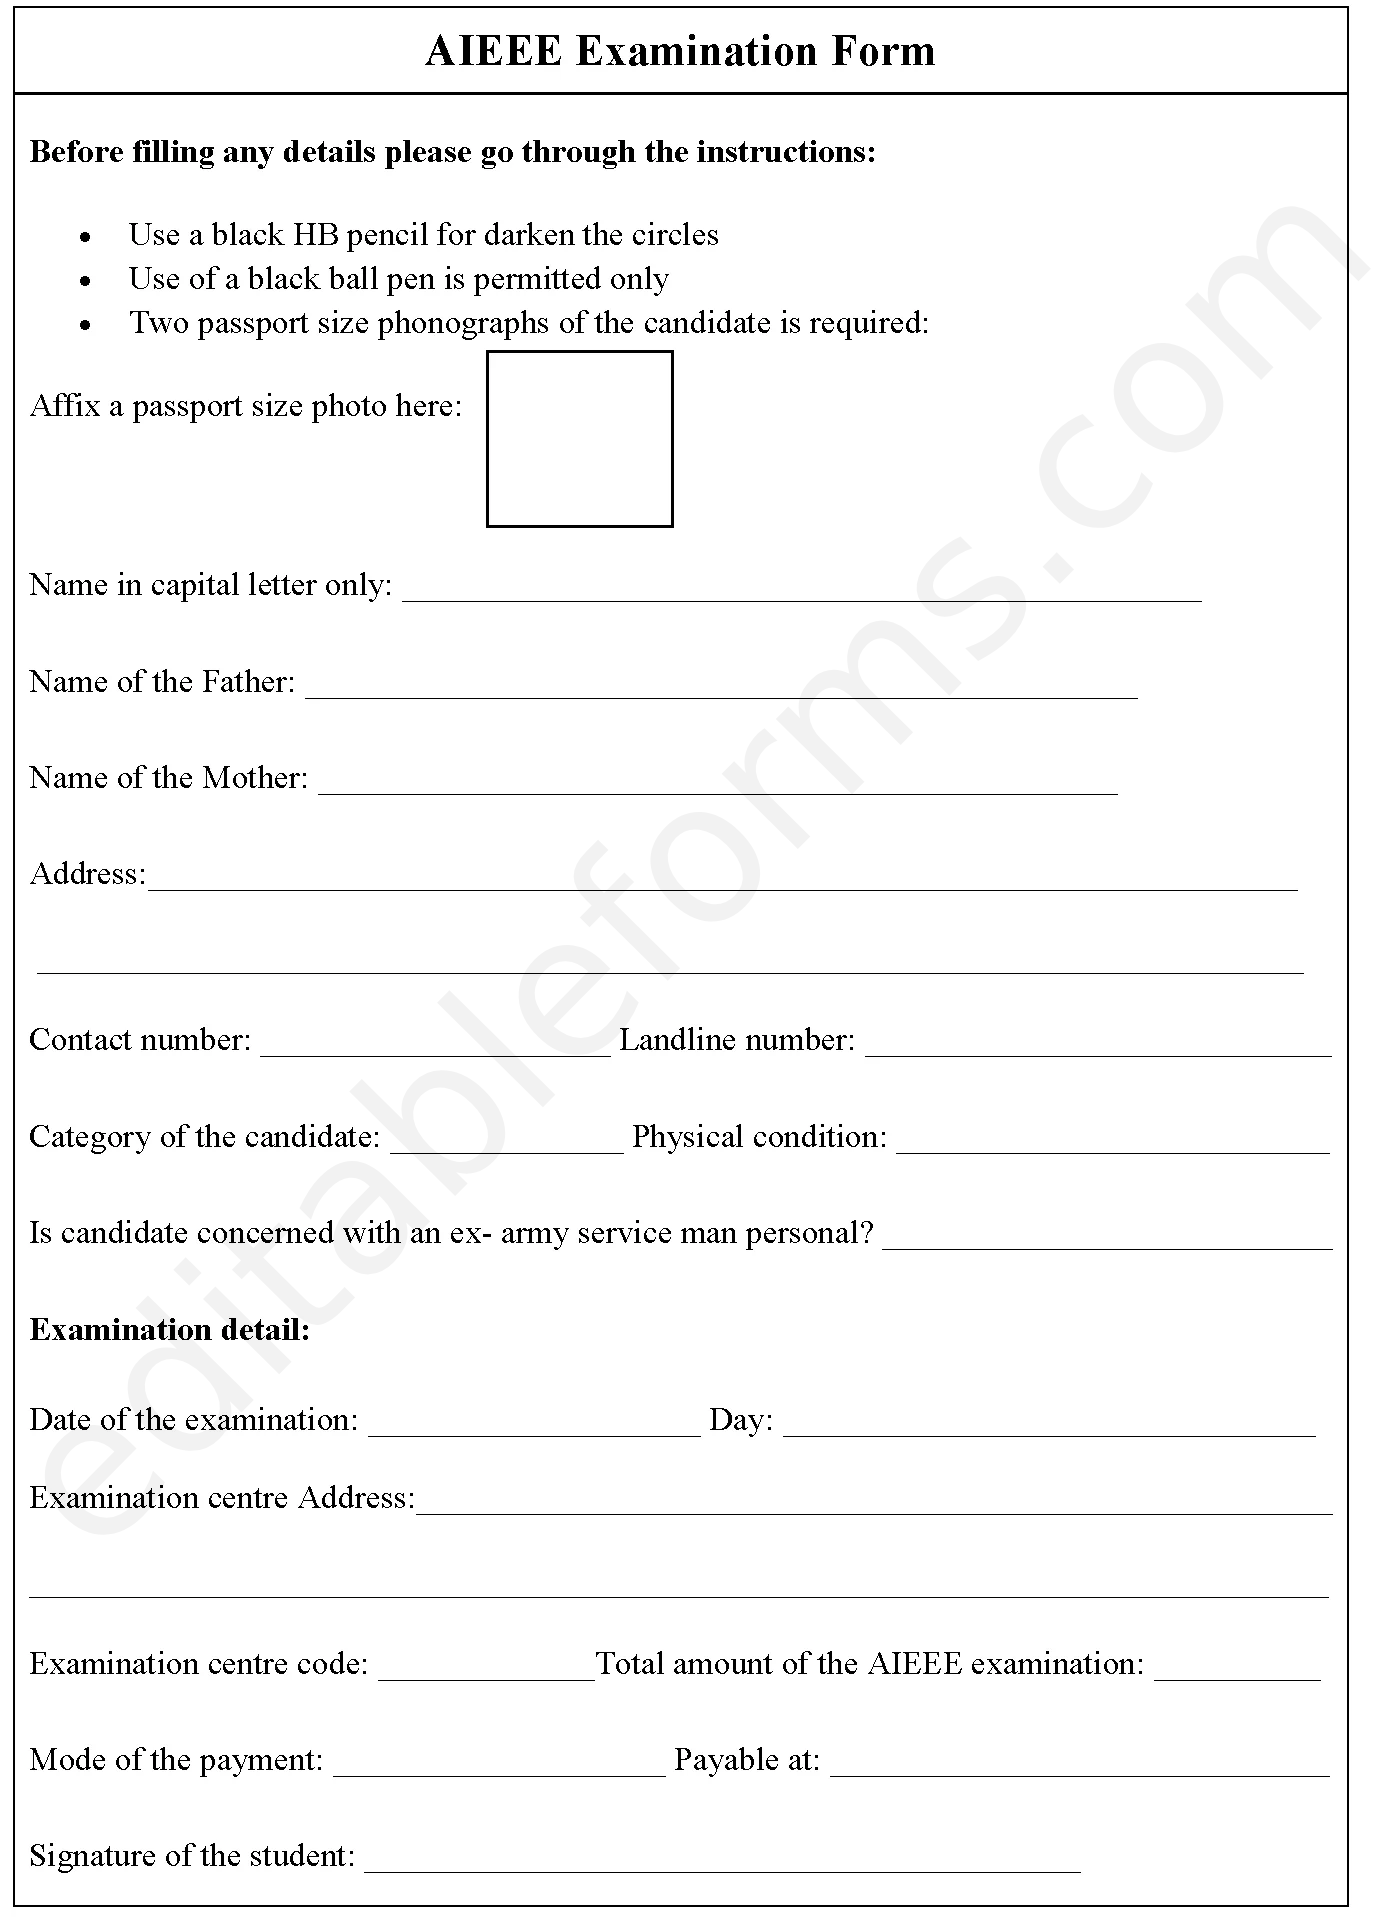 AIEEE Examination Fillable PDF Template